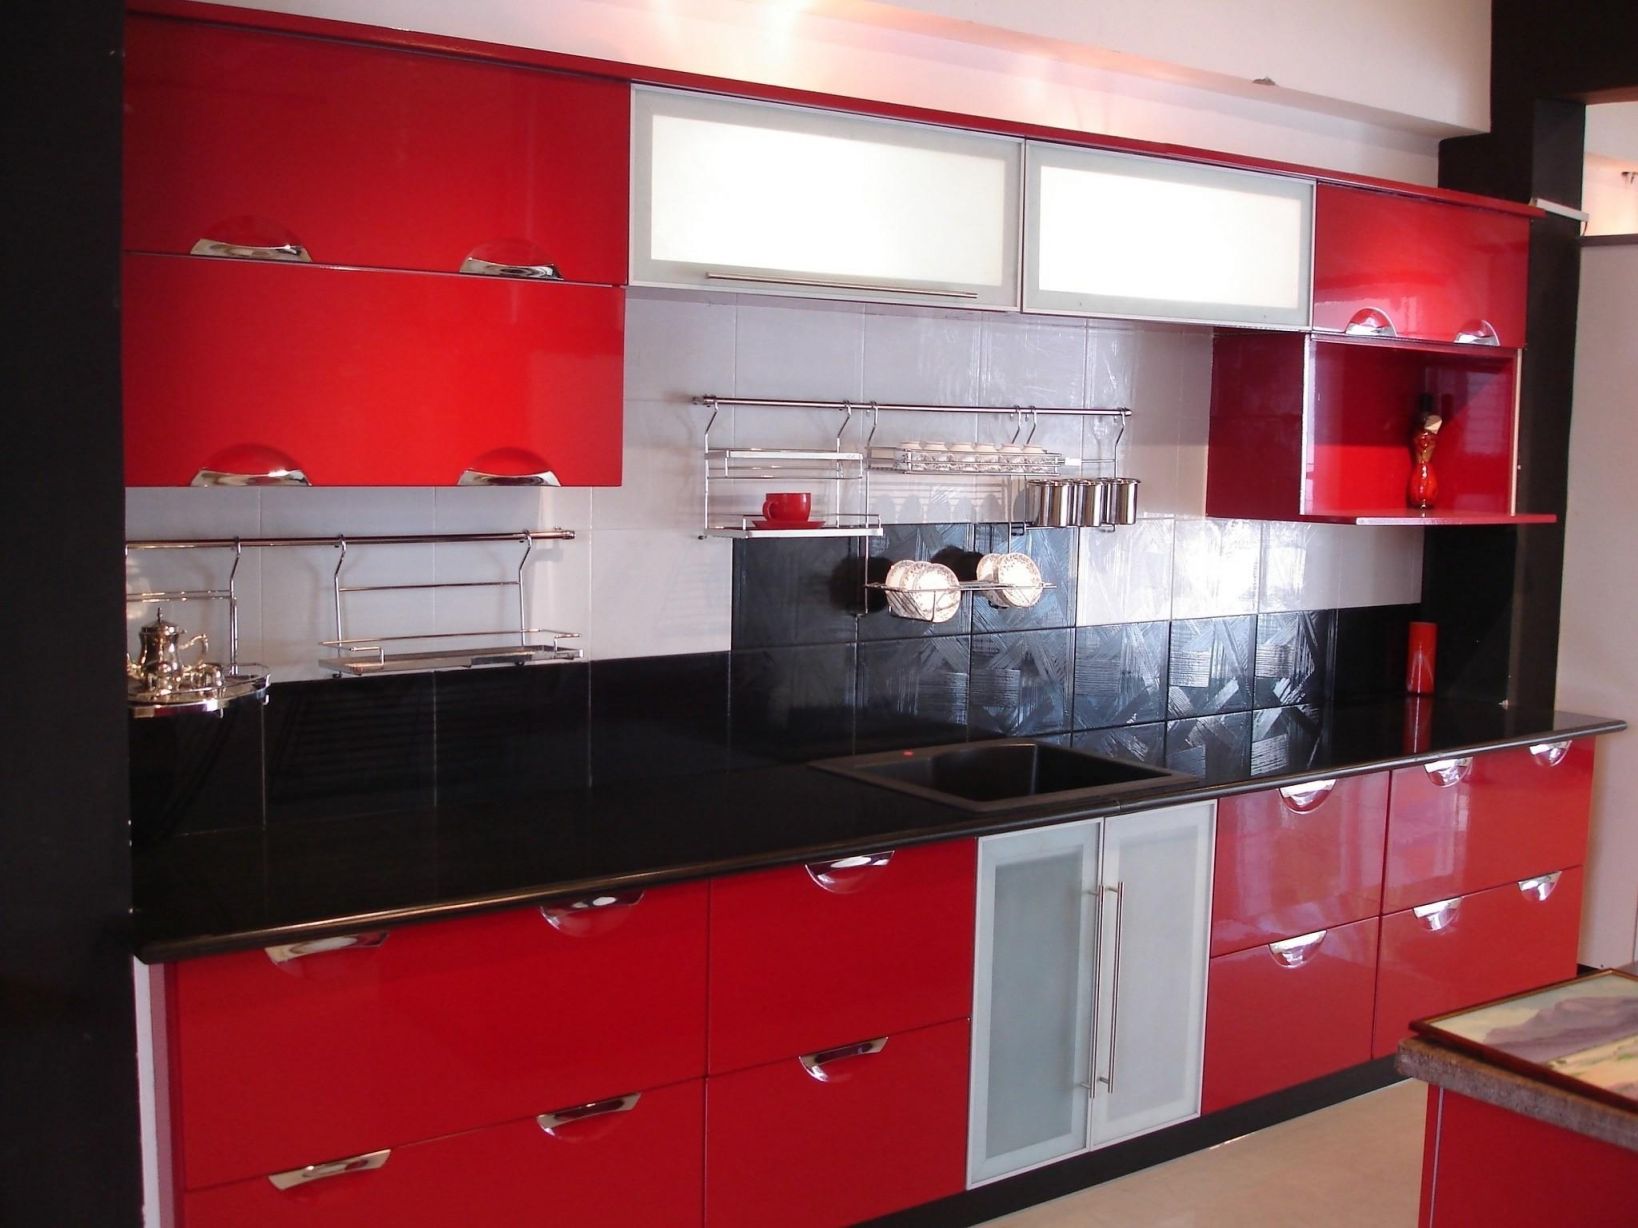 Awesome Modular Kitchen Design Red And White